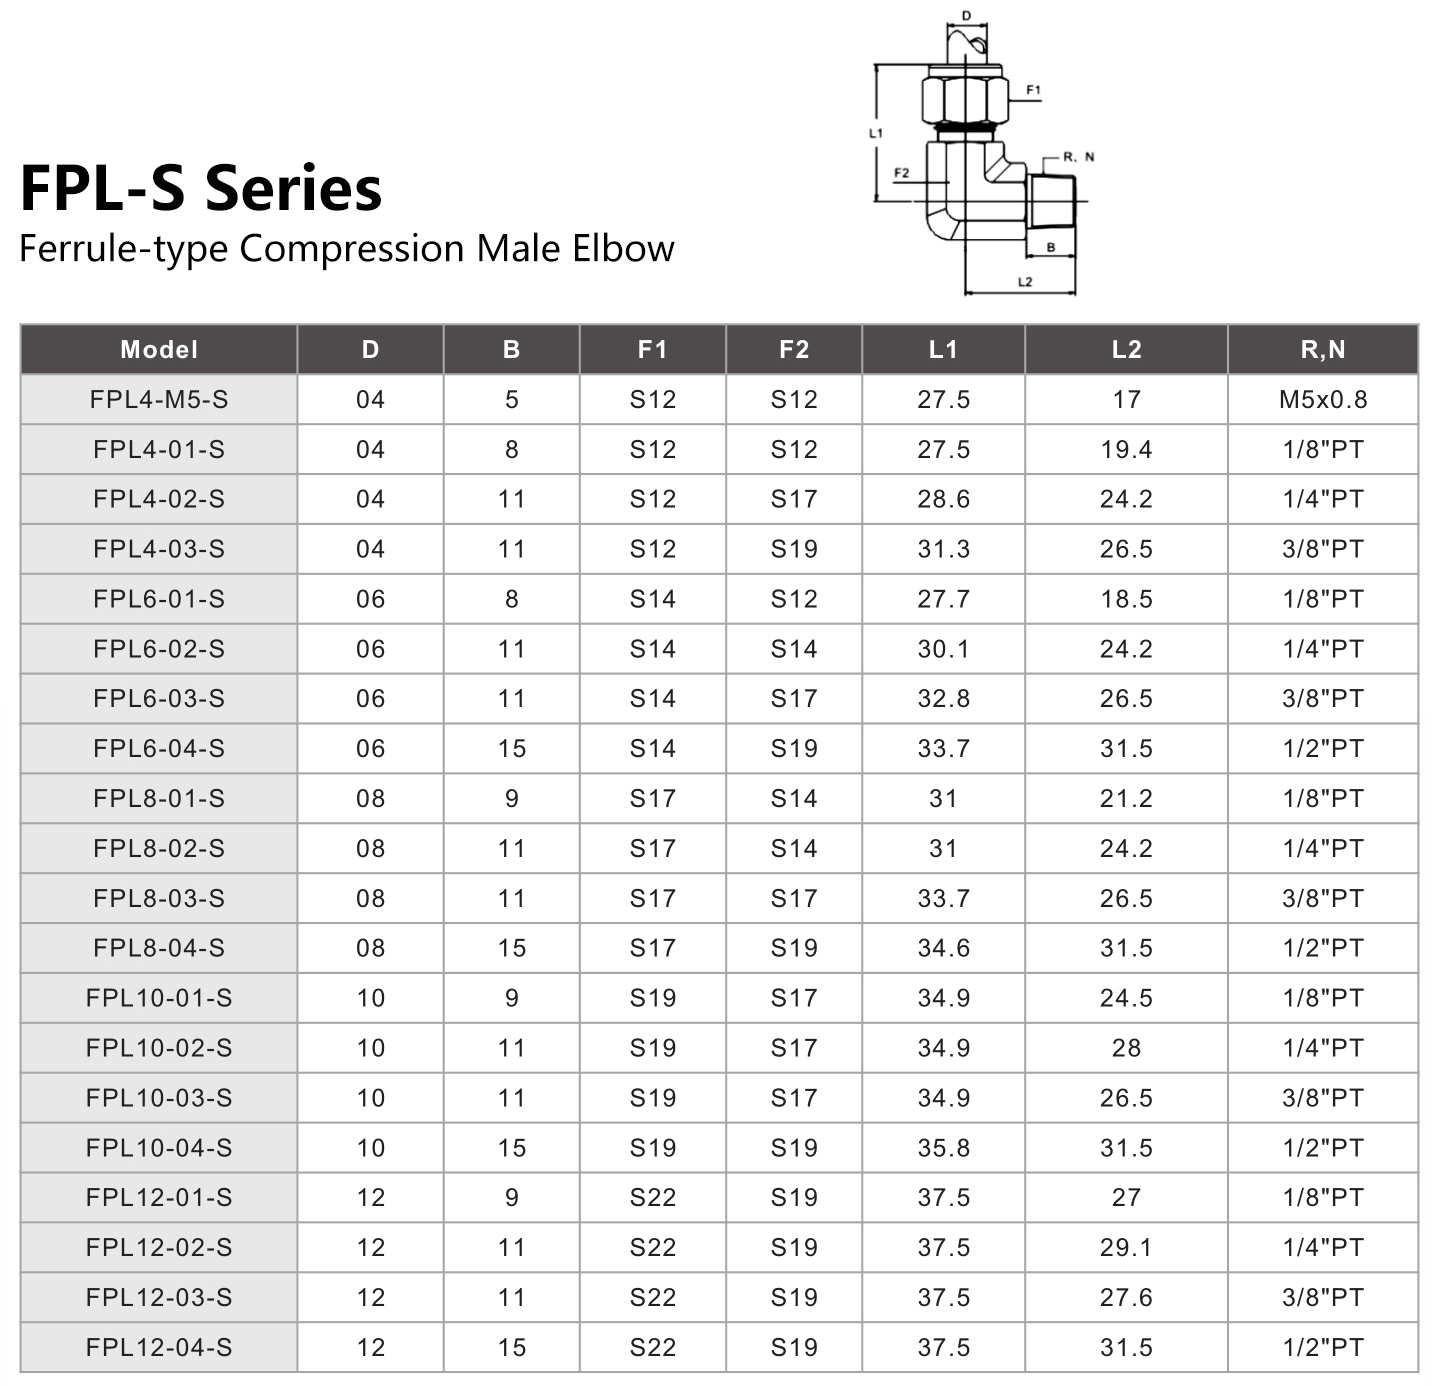 FPL-S Series Ferrule-type Compression Male Elbow